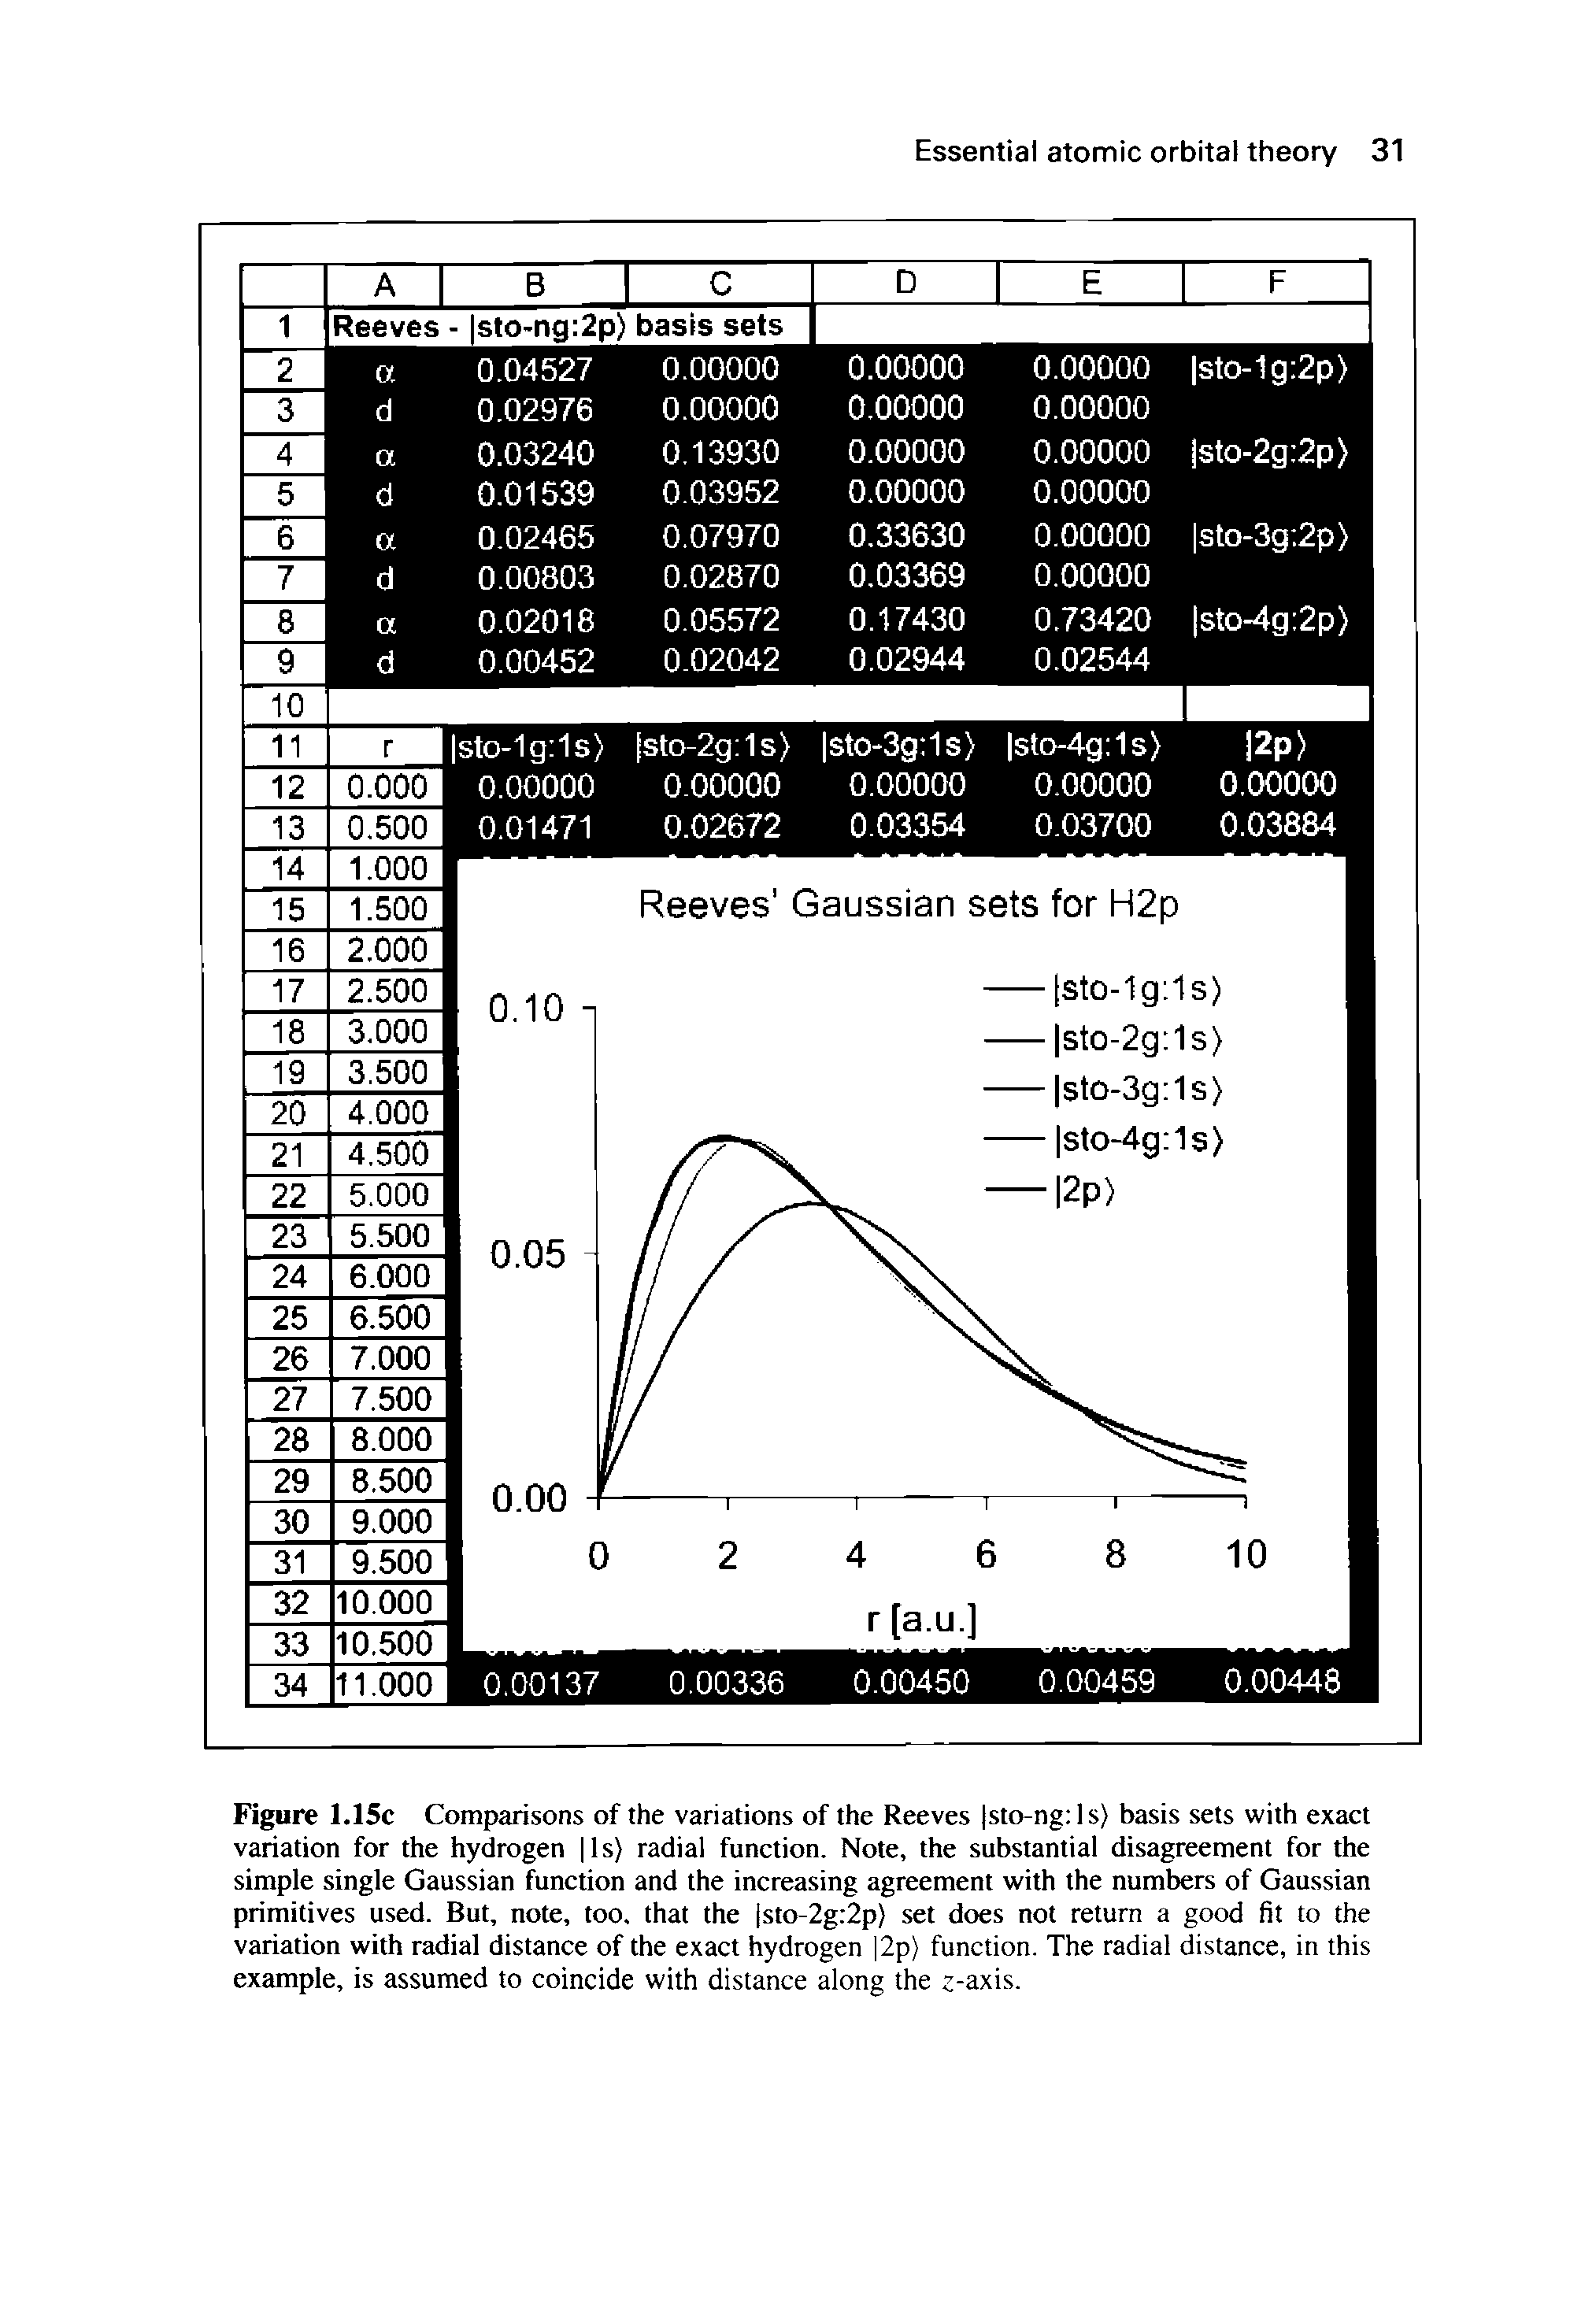 Figure 1.15c Comparisons of the variations of the Reeves sto-ng ls) basis sets with exact variation for the hydrogen ls) radial function. Note, the substantial disagreement for the simple single Gaussian function and the increasing agreement with the numbers of Gaussian primitives used. But, note, too. that the sto-2g 2p) set does not return a good fit to the variation with radial distance of the exact hydrogen 2p> function. The radial distance, in this example, is assumed to coincide with distance along the s-axis.